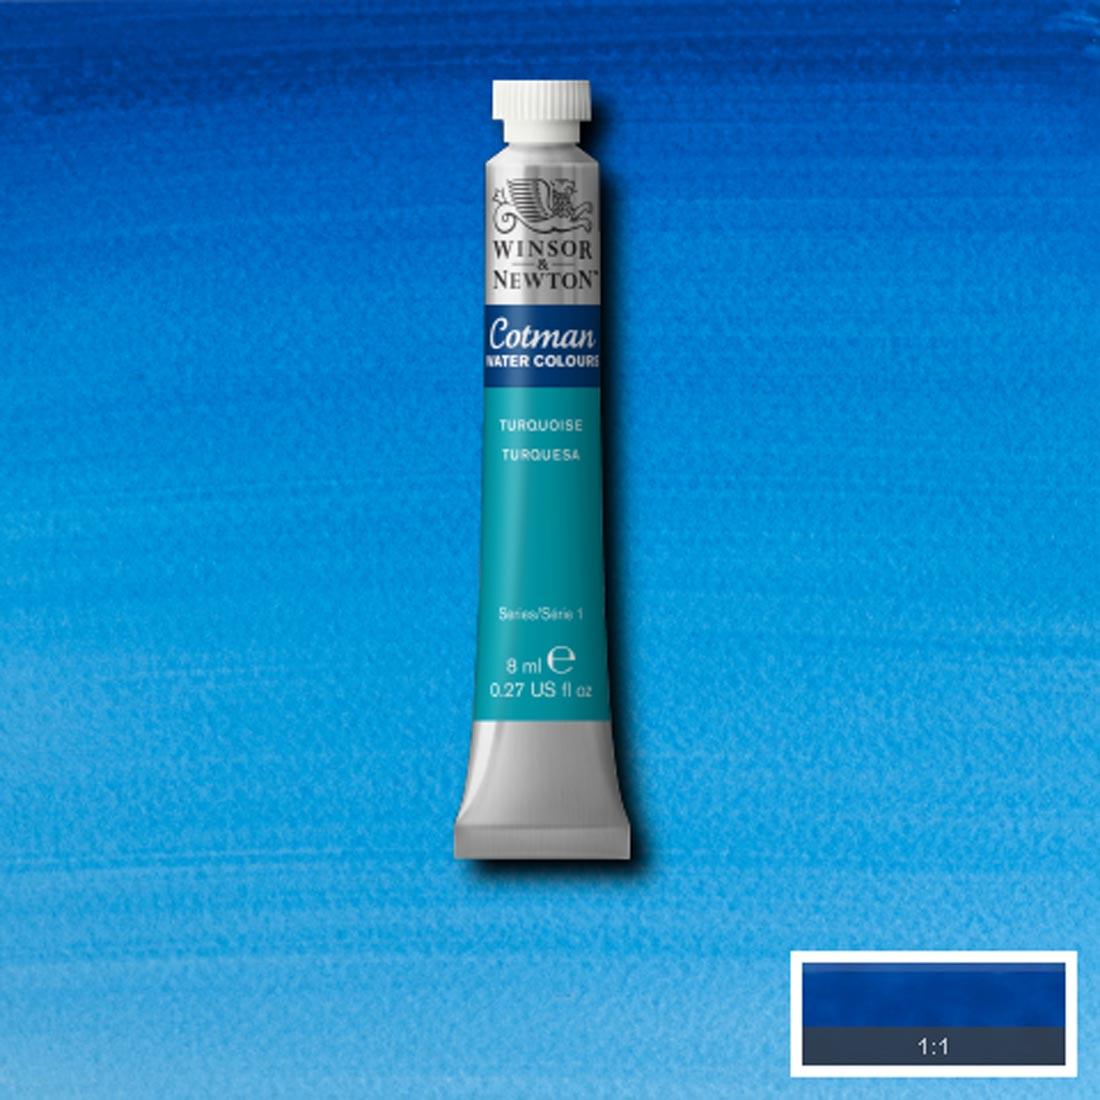 Tube of Turquoise Winsor and Newton Cotman Water Colour with a paint swatch for the background